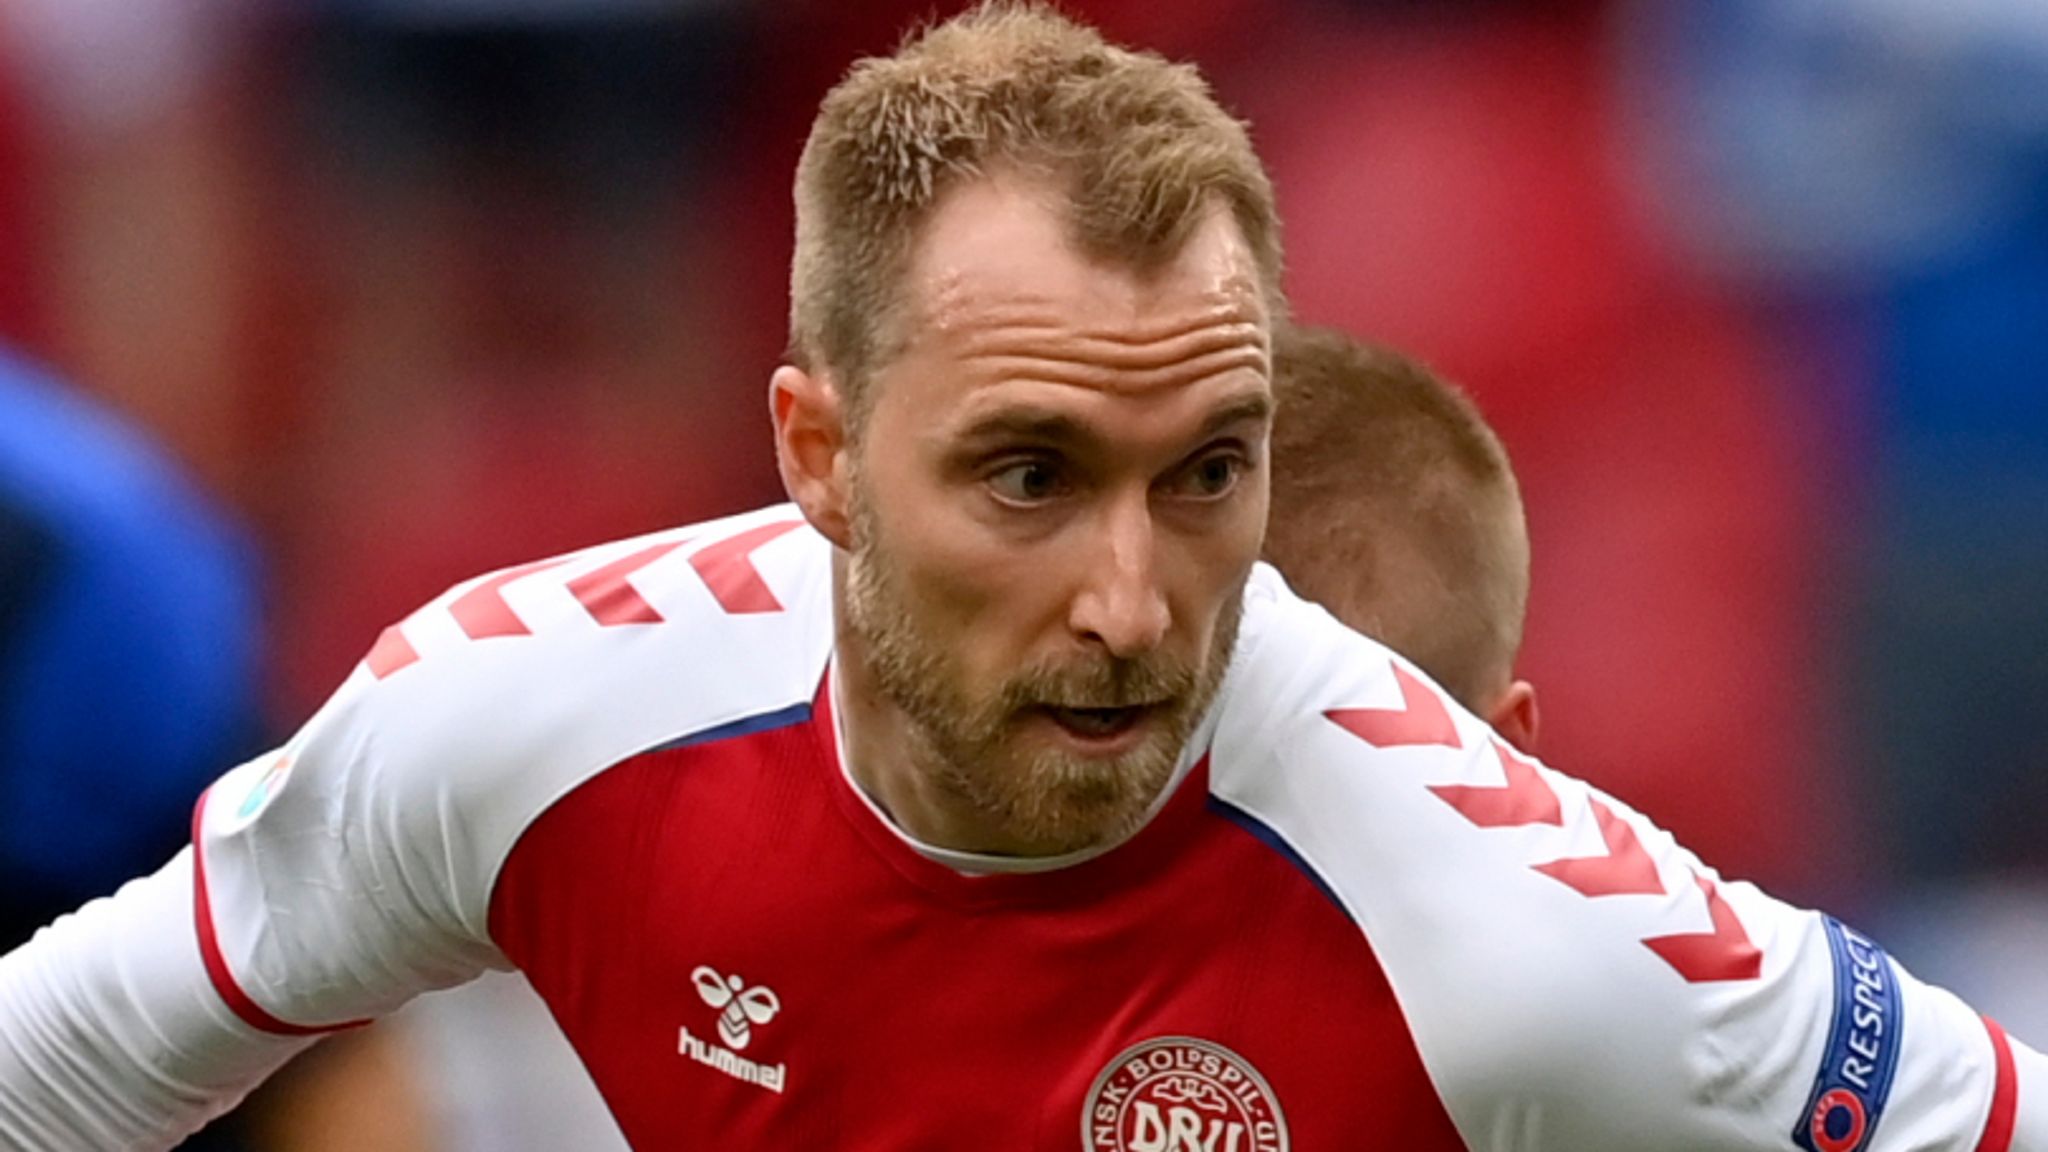 Denmark: Christian Eriksen aiming to play at World Cup 2022